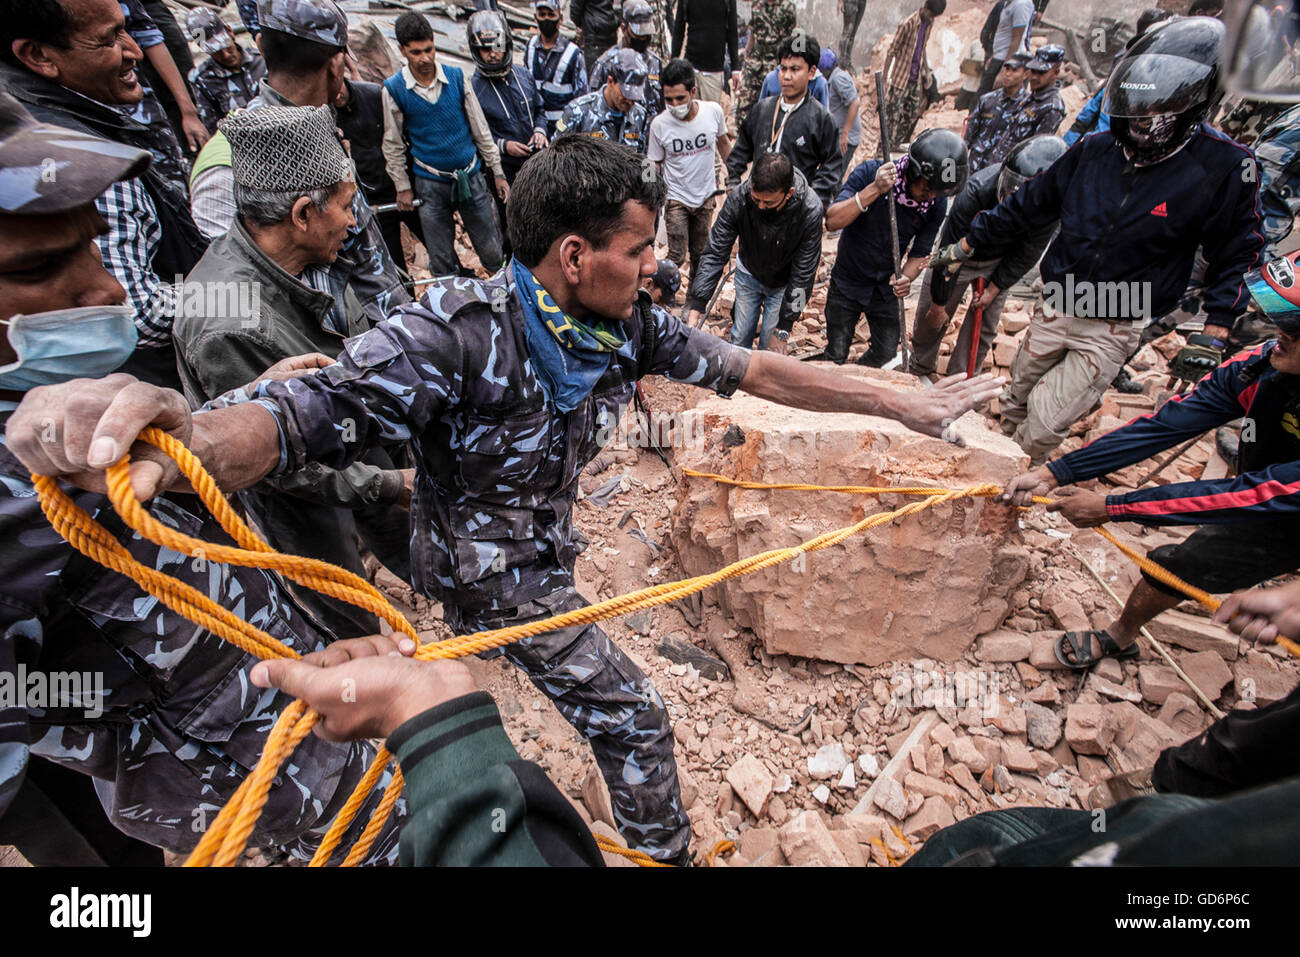 Rescuers work together  on removing rubble in an effort to recover bodies. Stock Photo